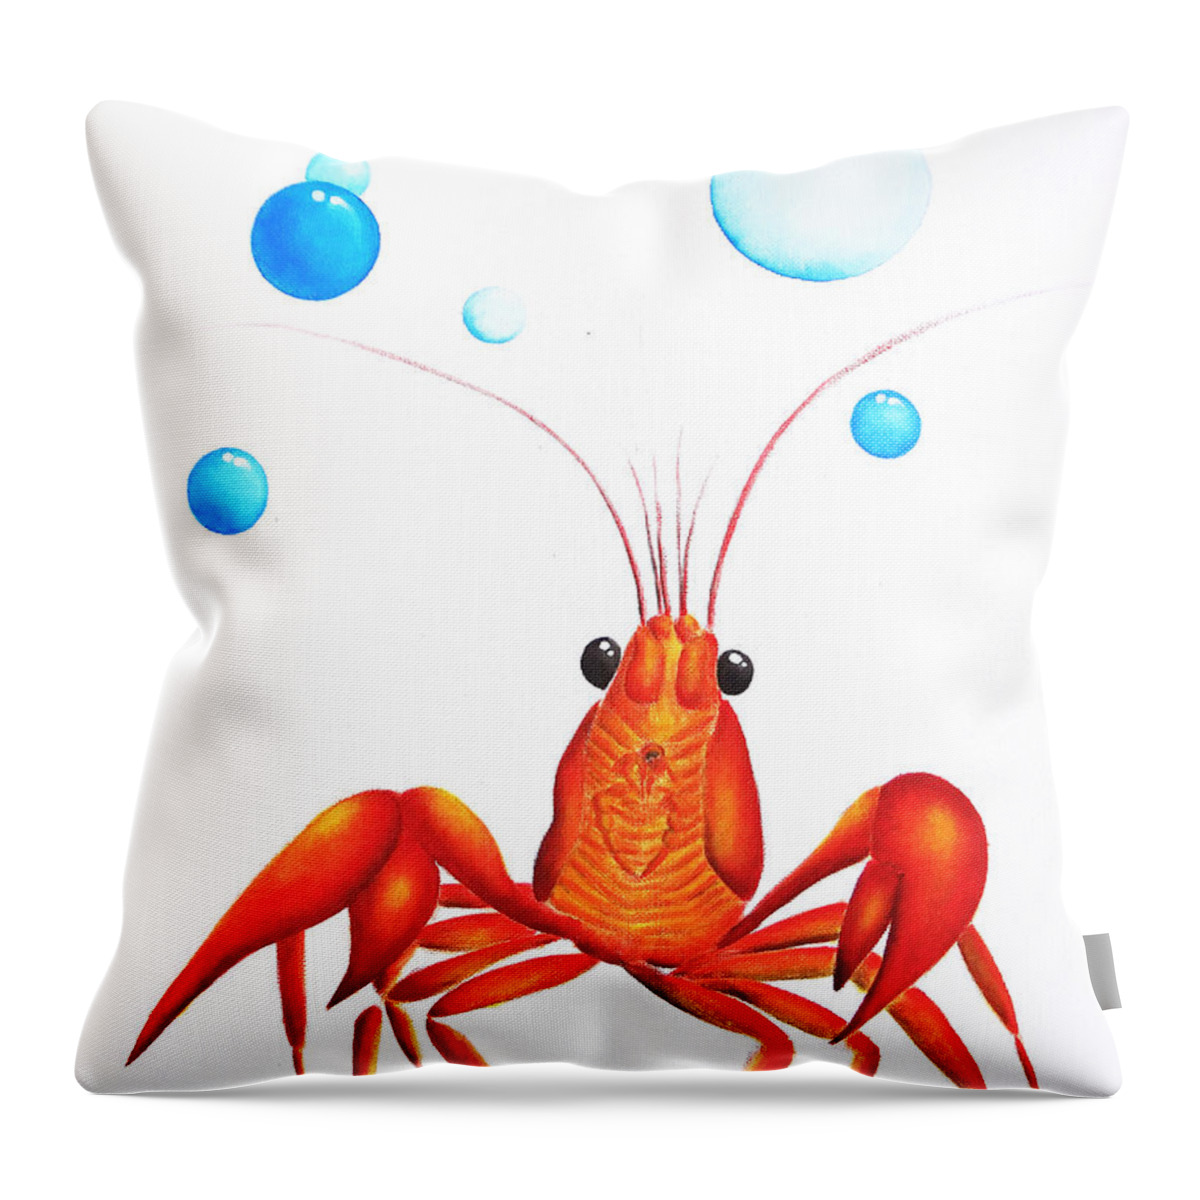 Lobster Throw Pillow featuring the painting Chasing Dreams by Oiyee At Oystudio